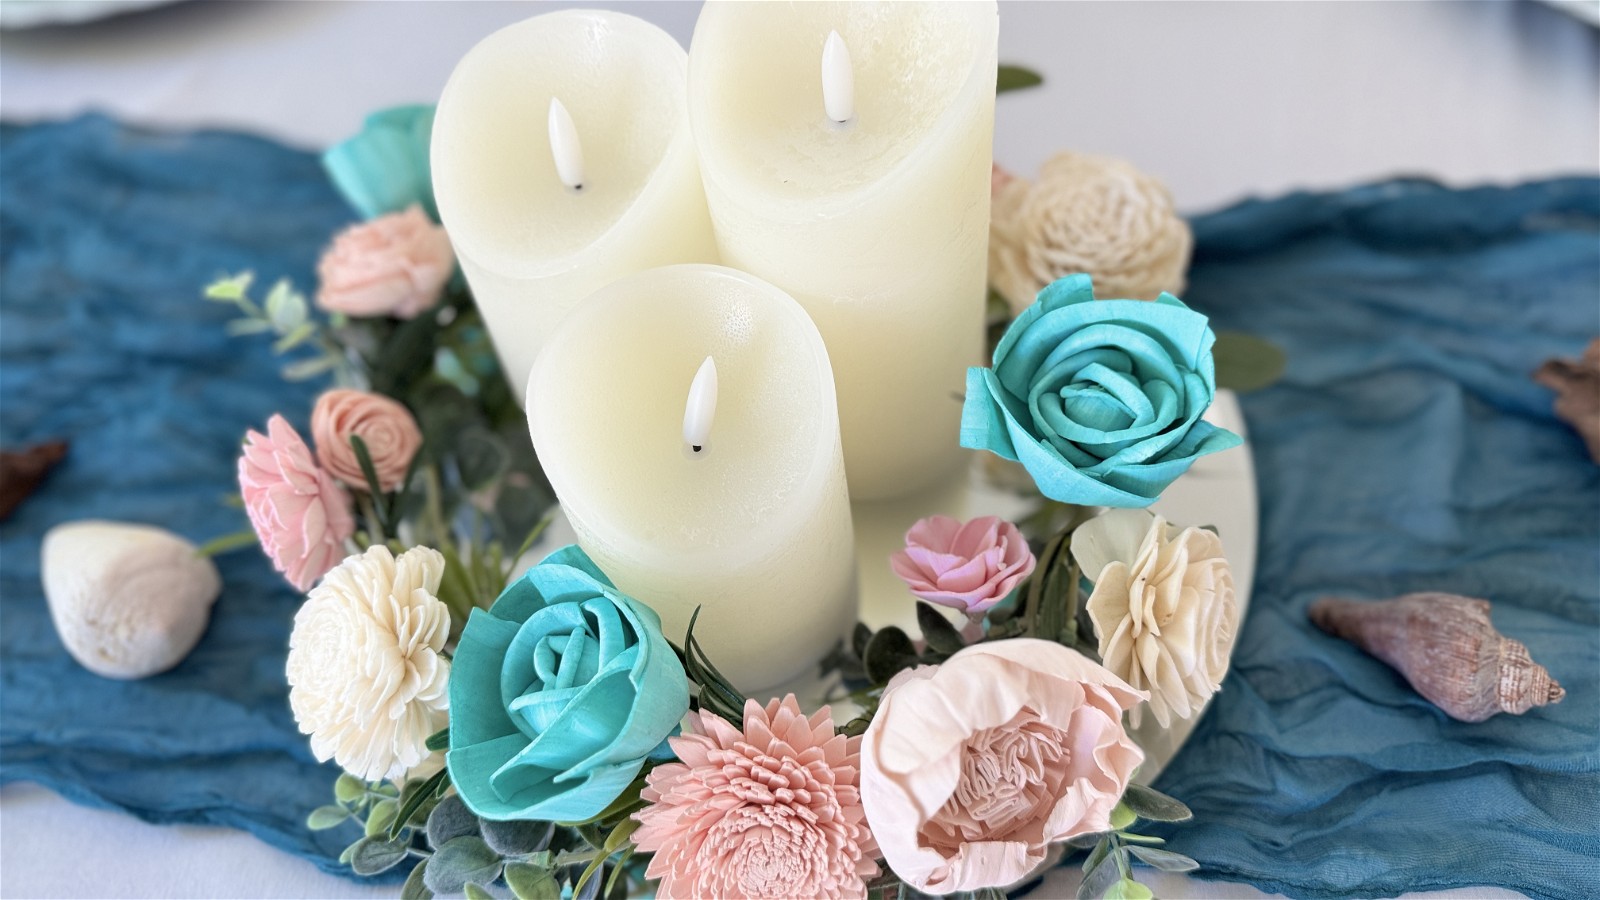 Image of Candle or Vase Garland Flower Ring - DIY Wedding Centerpiece Step-by-Step Instructions